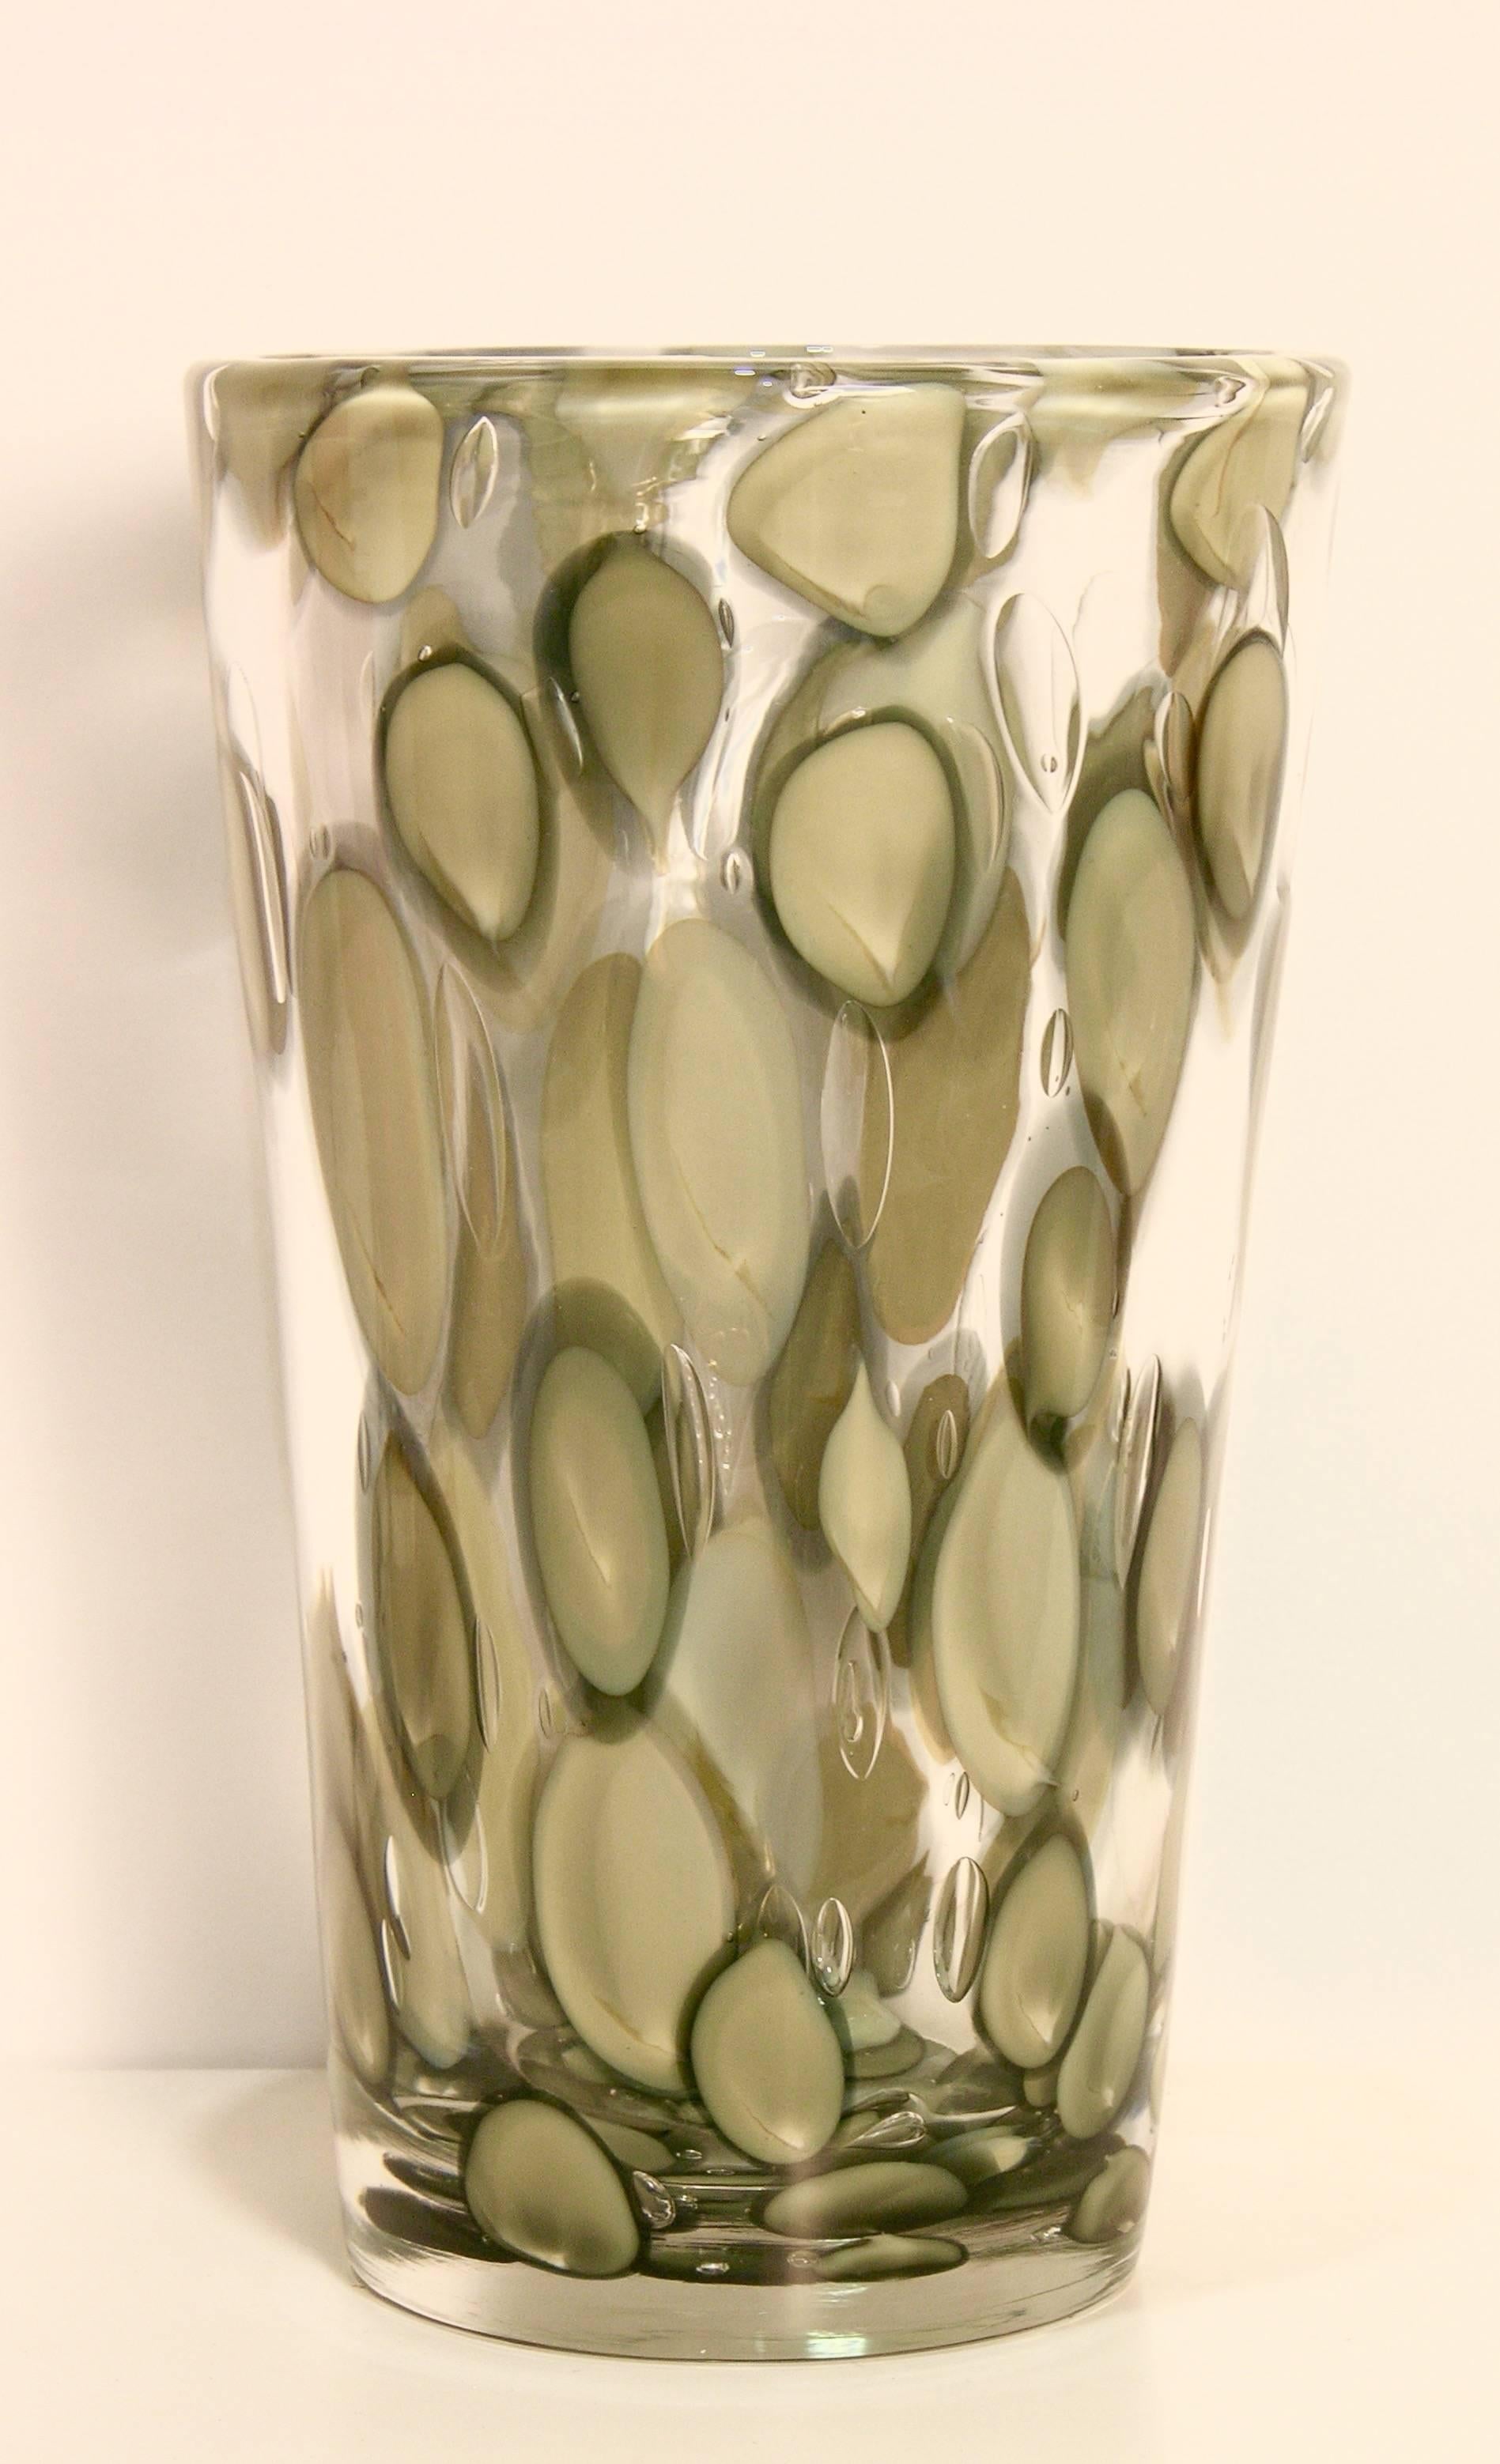 A very chic important creation signed by Pino Signoretto, considered one of the greatest glass blowers and associated to many Artworks by Dale Chihuly, the body is worked with spots in a very rare and elegant gray/cream color, some with a black